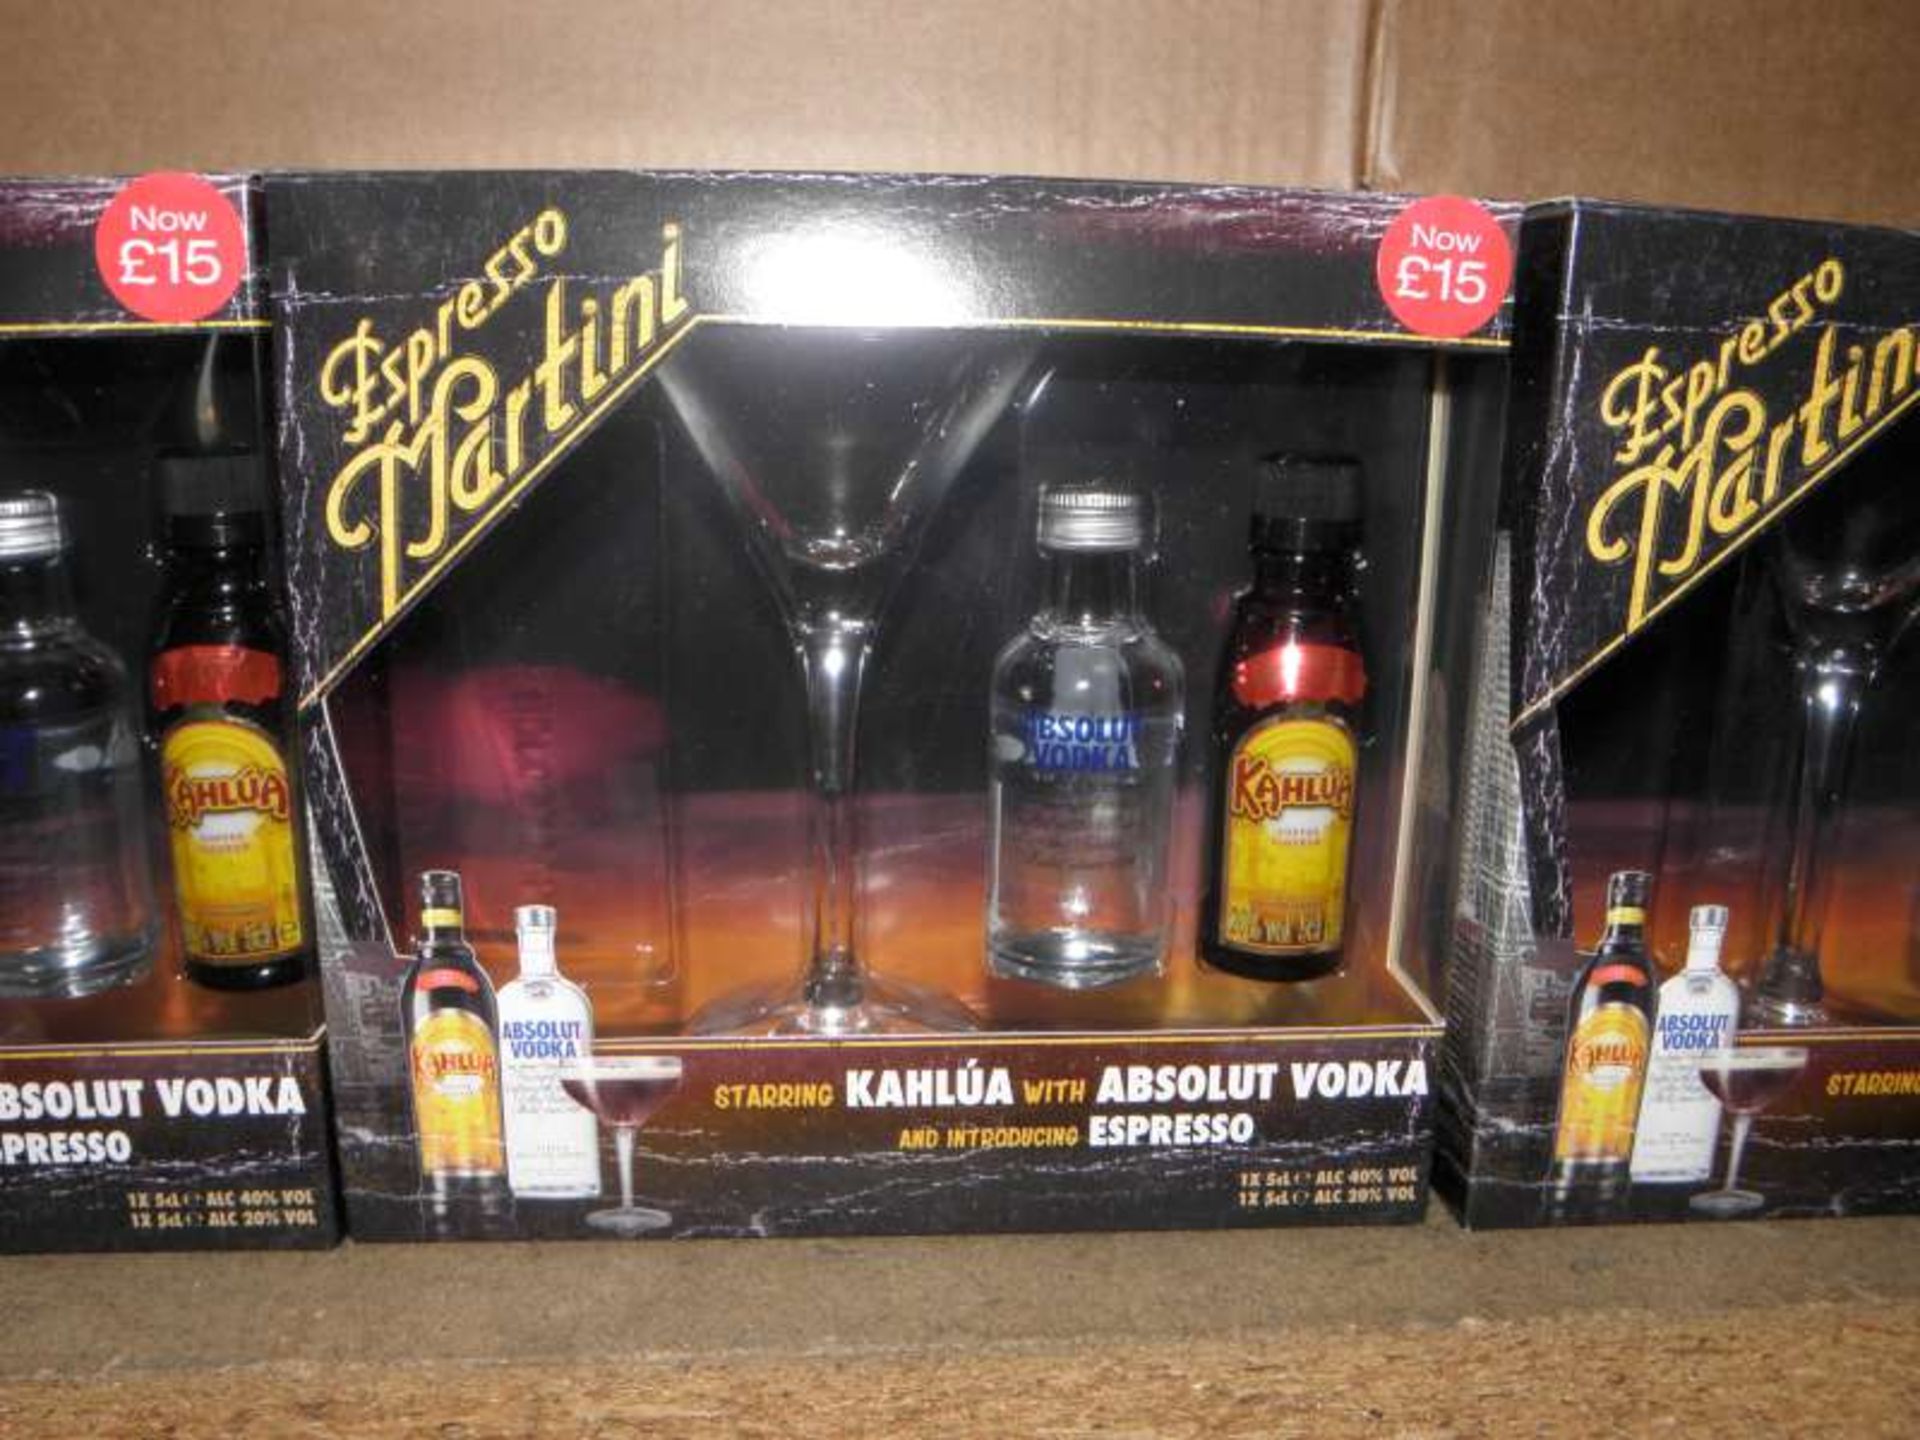 18 X ESPRESSO MARTINI GIFT SETS EACH SET CONTAINS COCKTAIL GLASS, 1 X 5 CL BOTTLE OF ABSOLUT